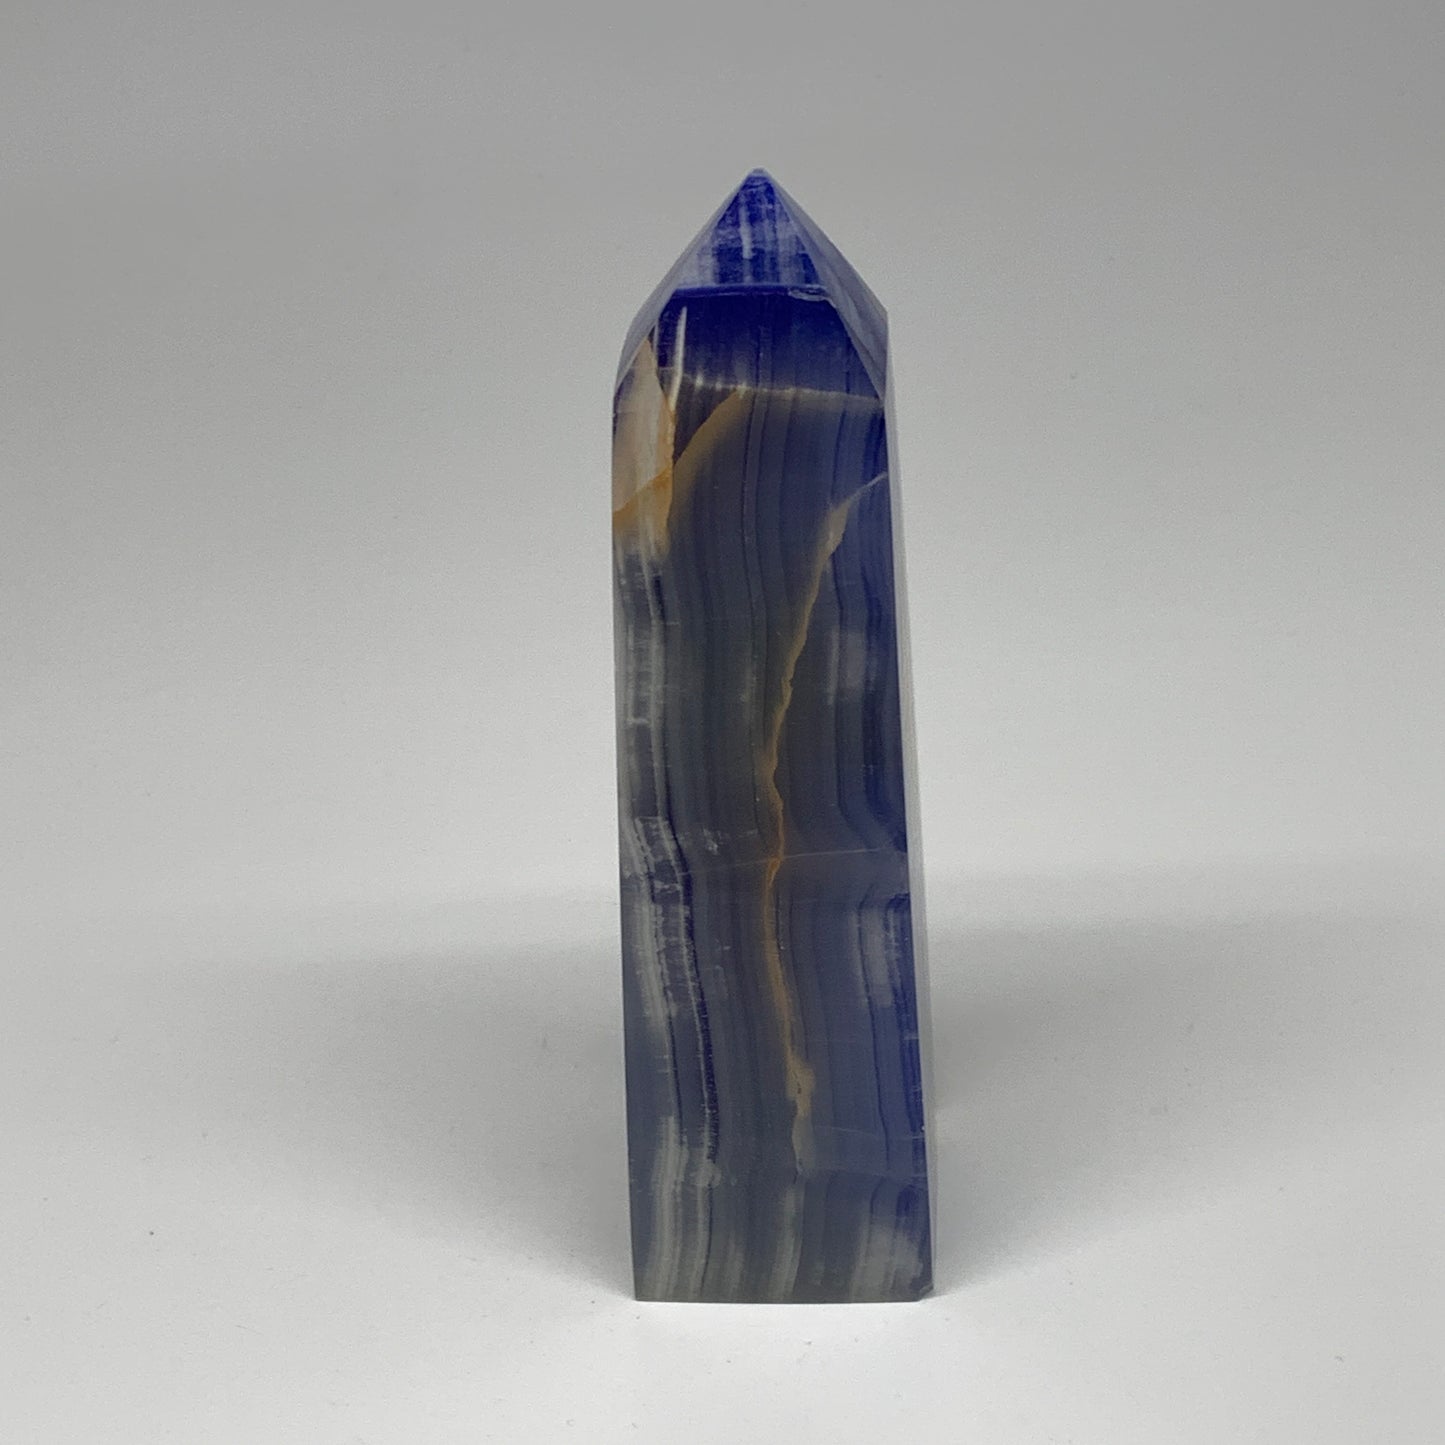 508g, 6"x1.6"x1.7" Dyed/Heated Calcite Point Tower Obelisk Crystal, B24976